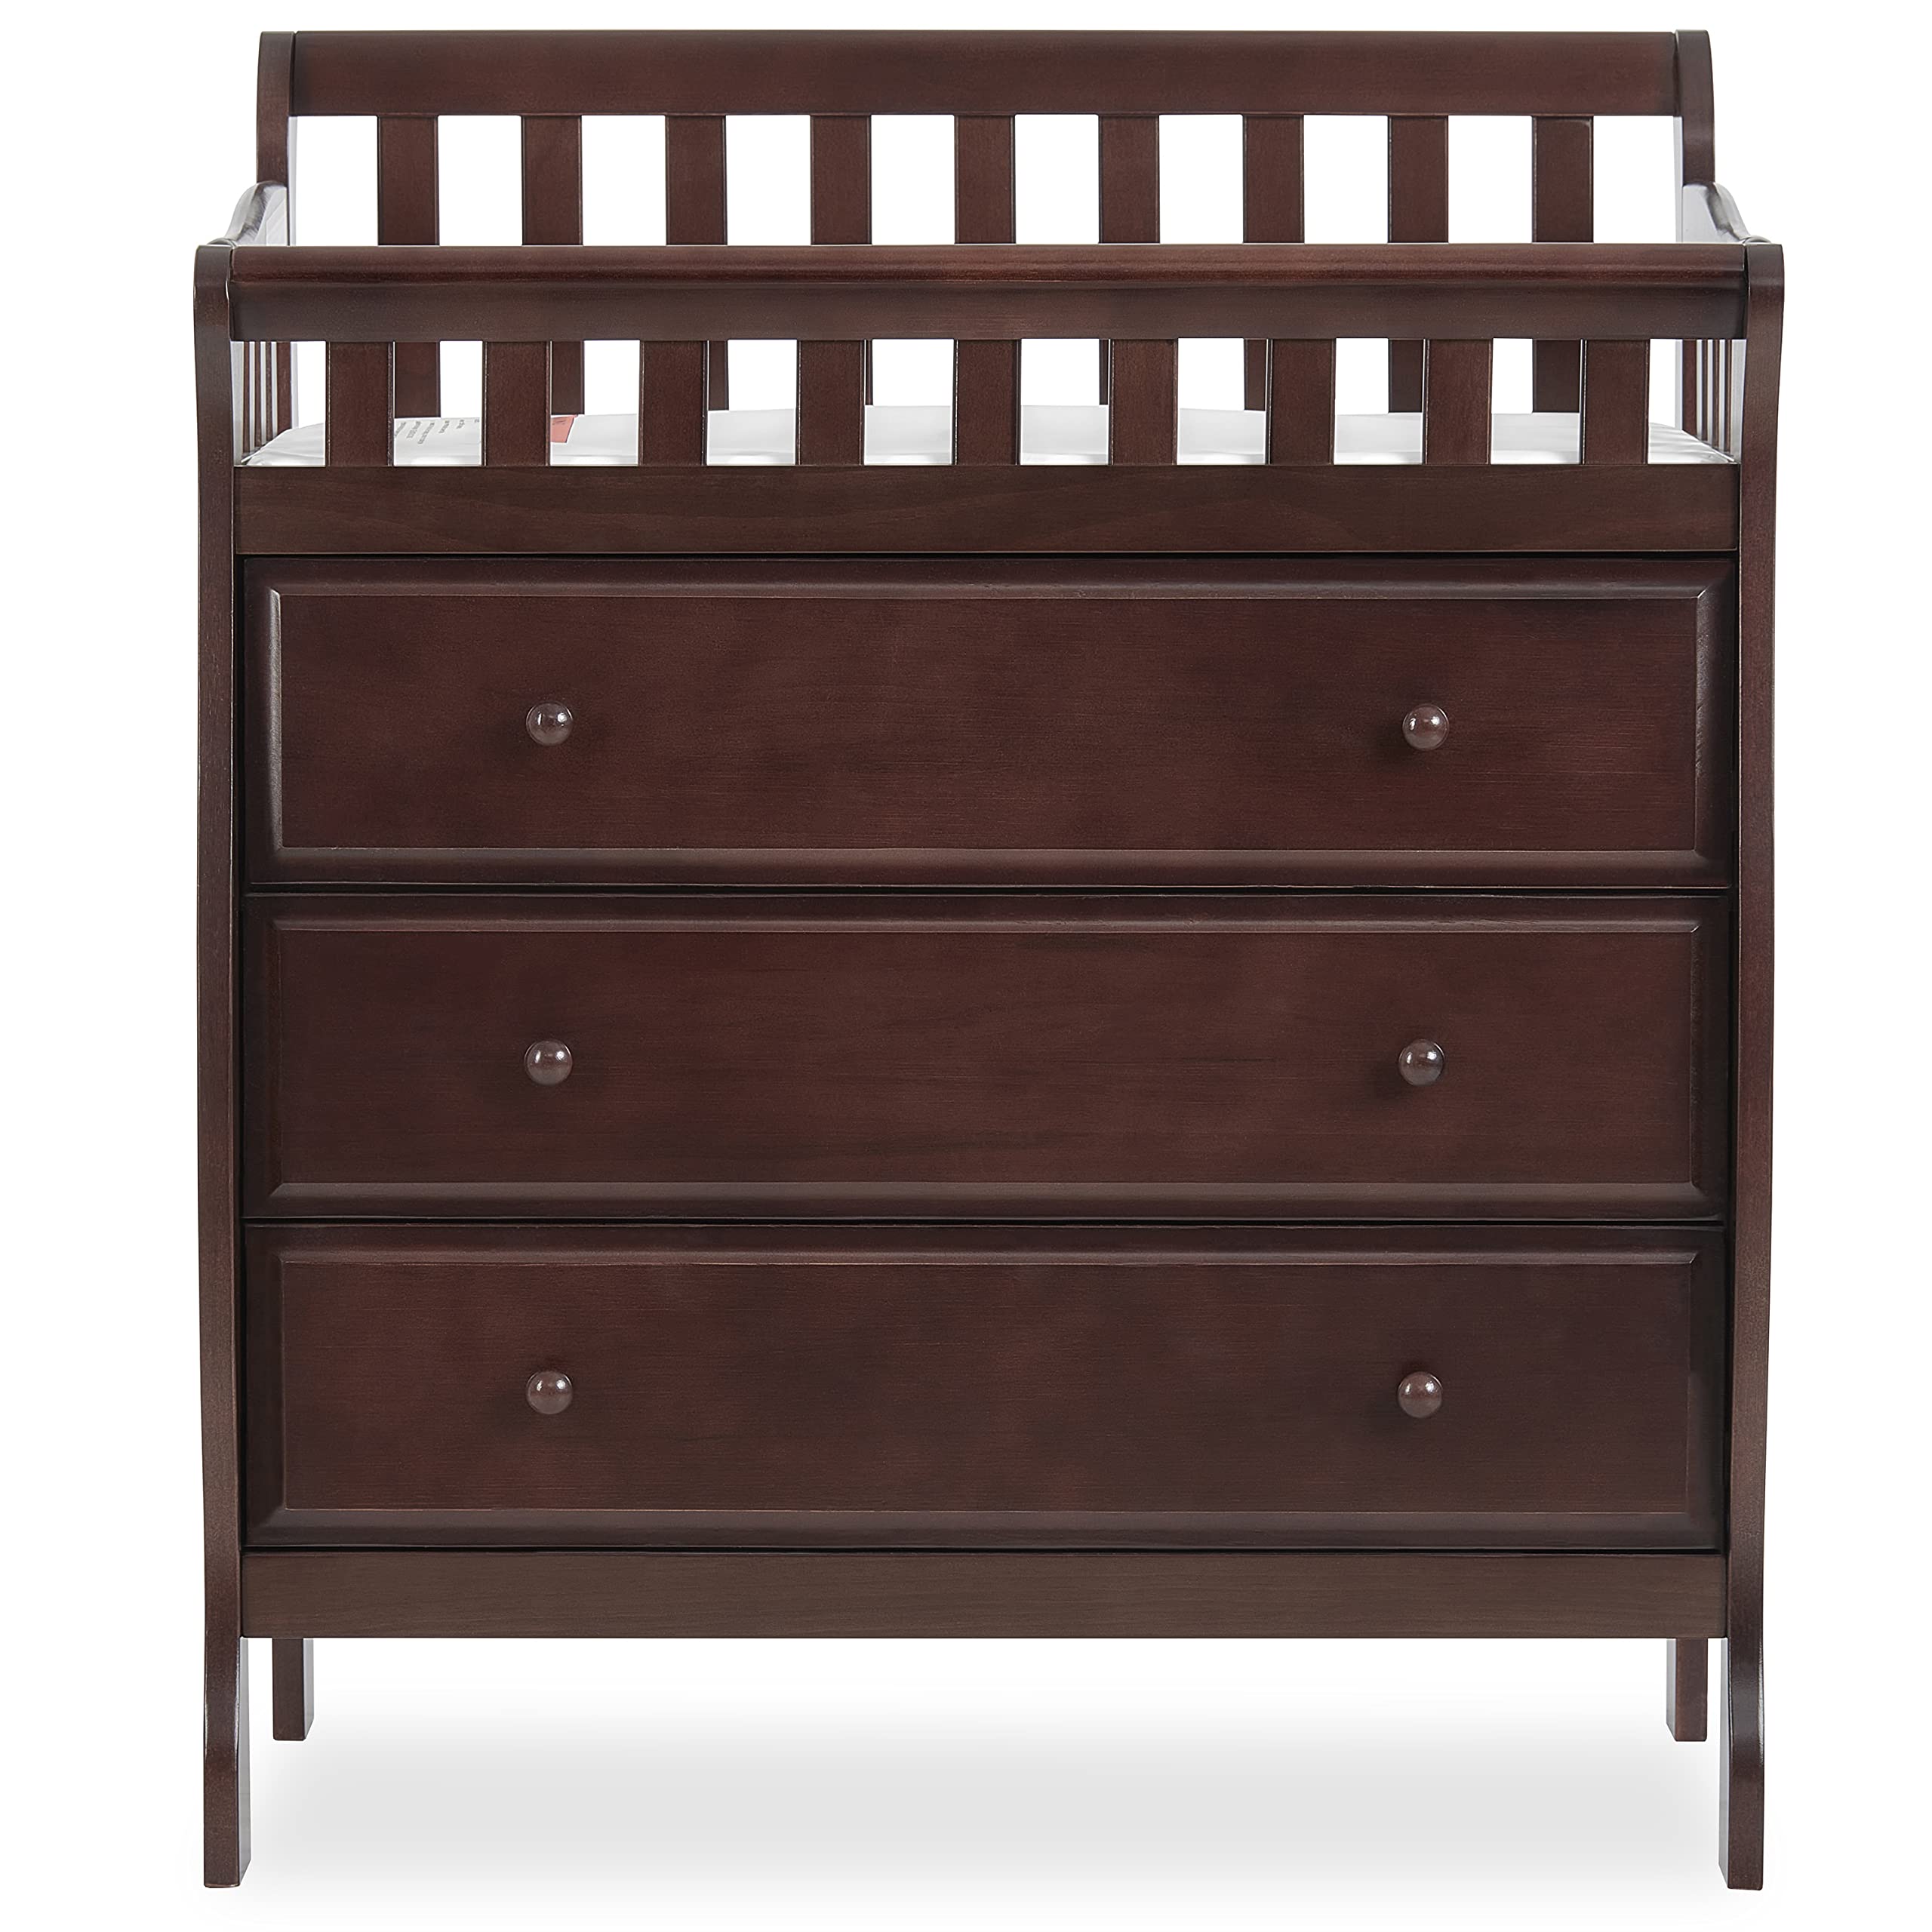 Dream On Me Marcus Changing Table And Dresser In Espresso, Features 3 Spacious Drawers, Non-Toxic Finishes, Comes With 1